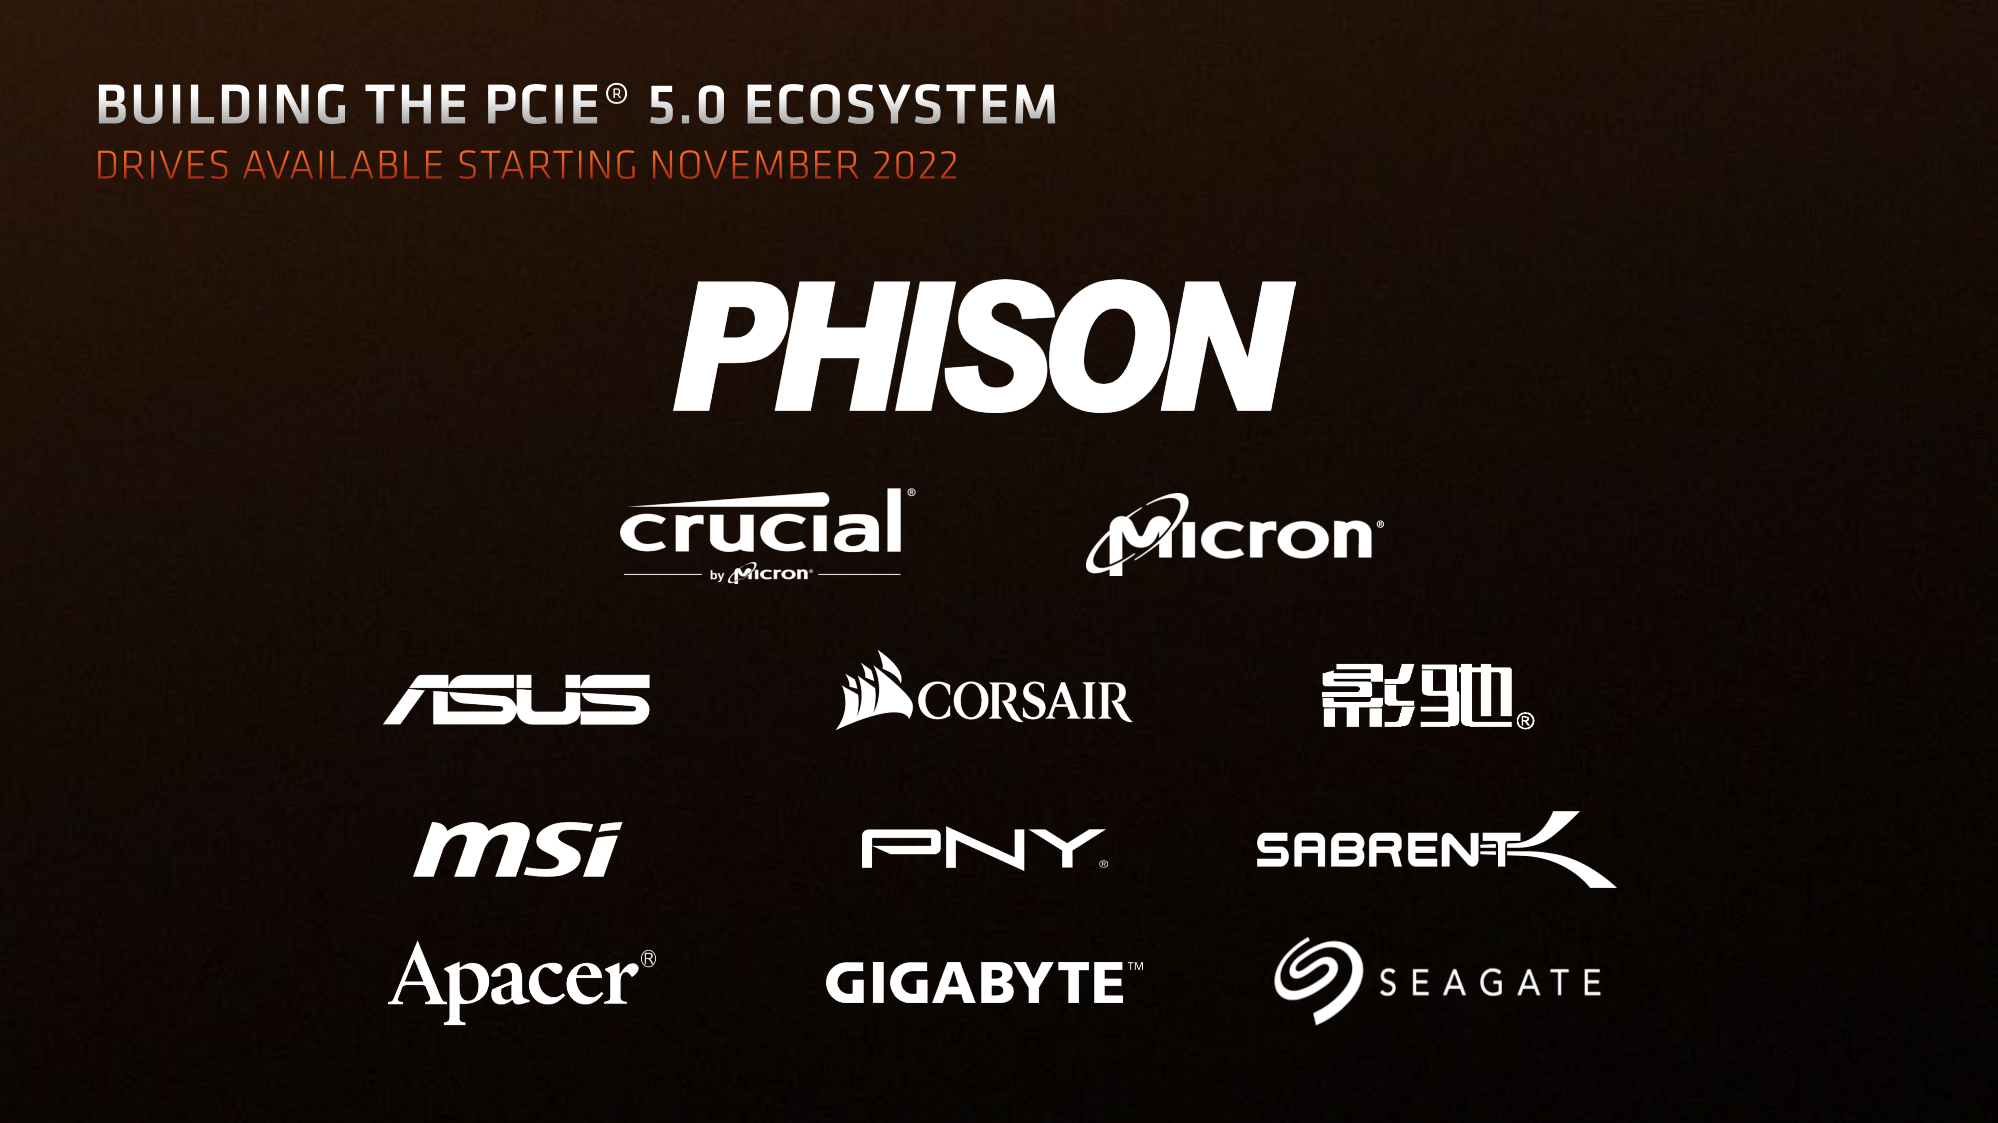 AMD slide indicating PCIe 5.0 launch date